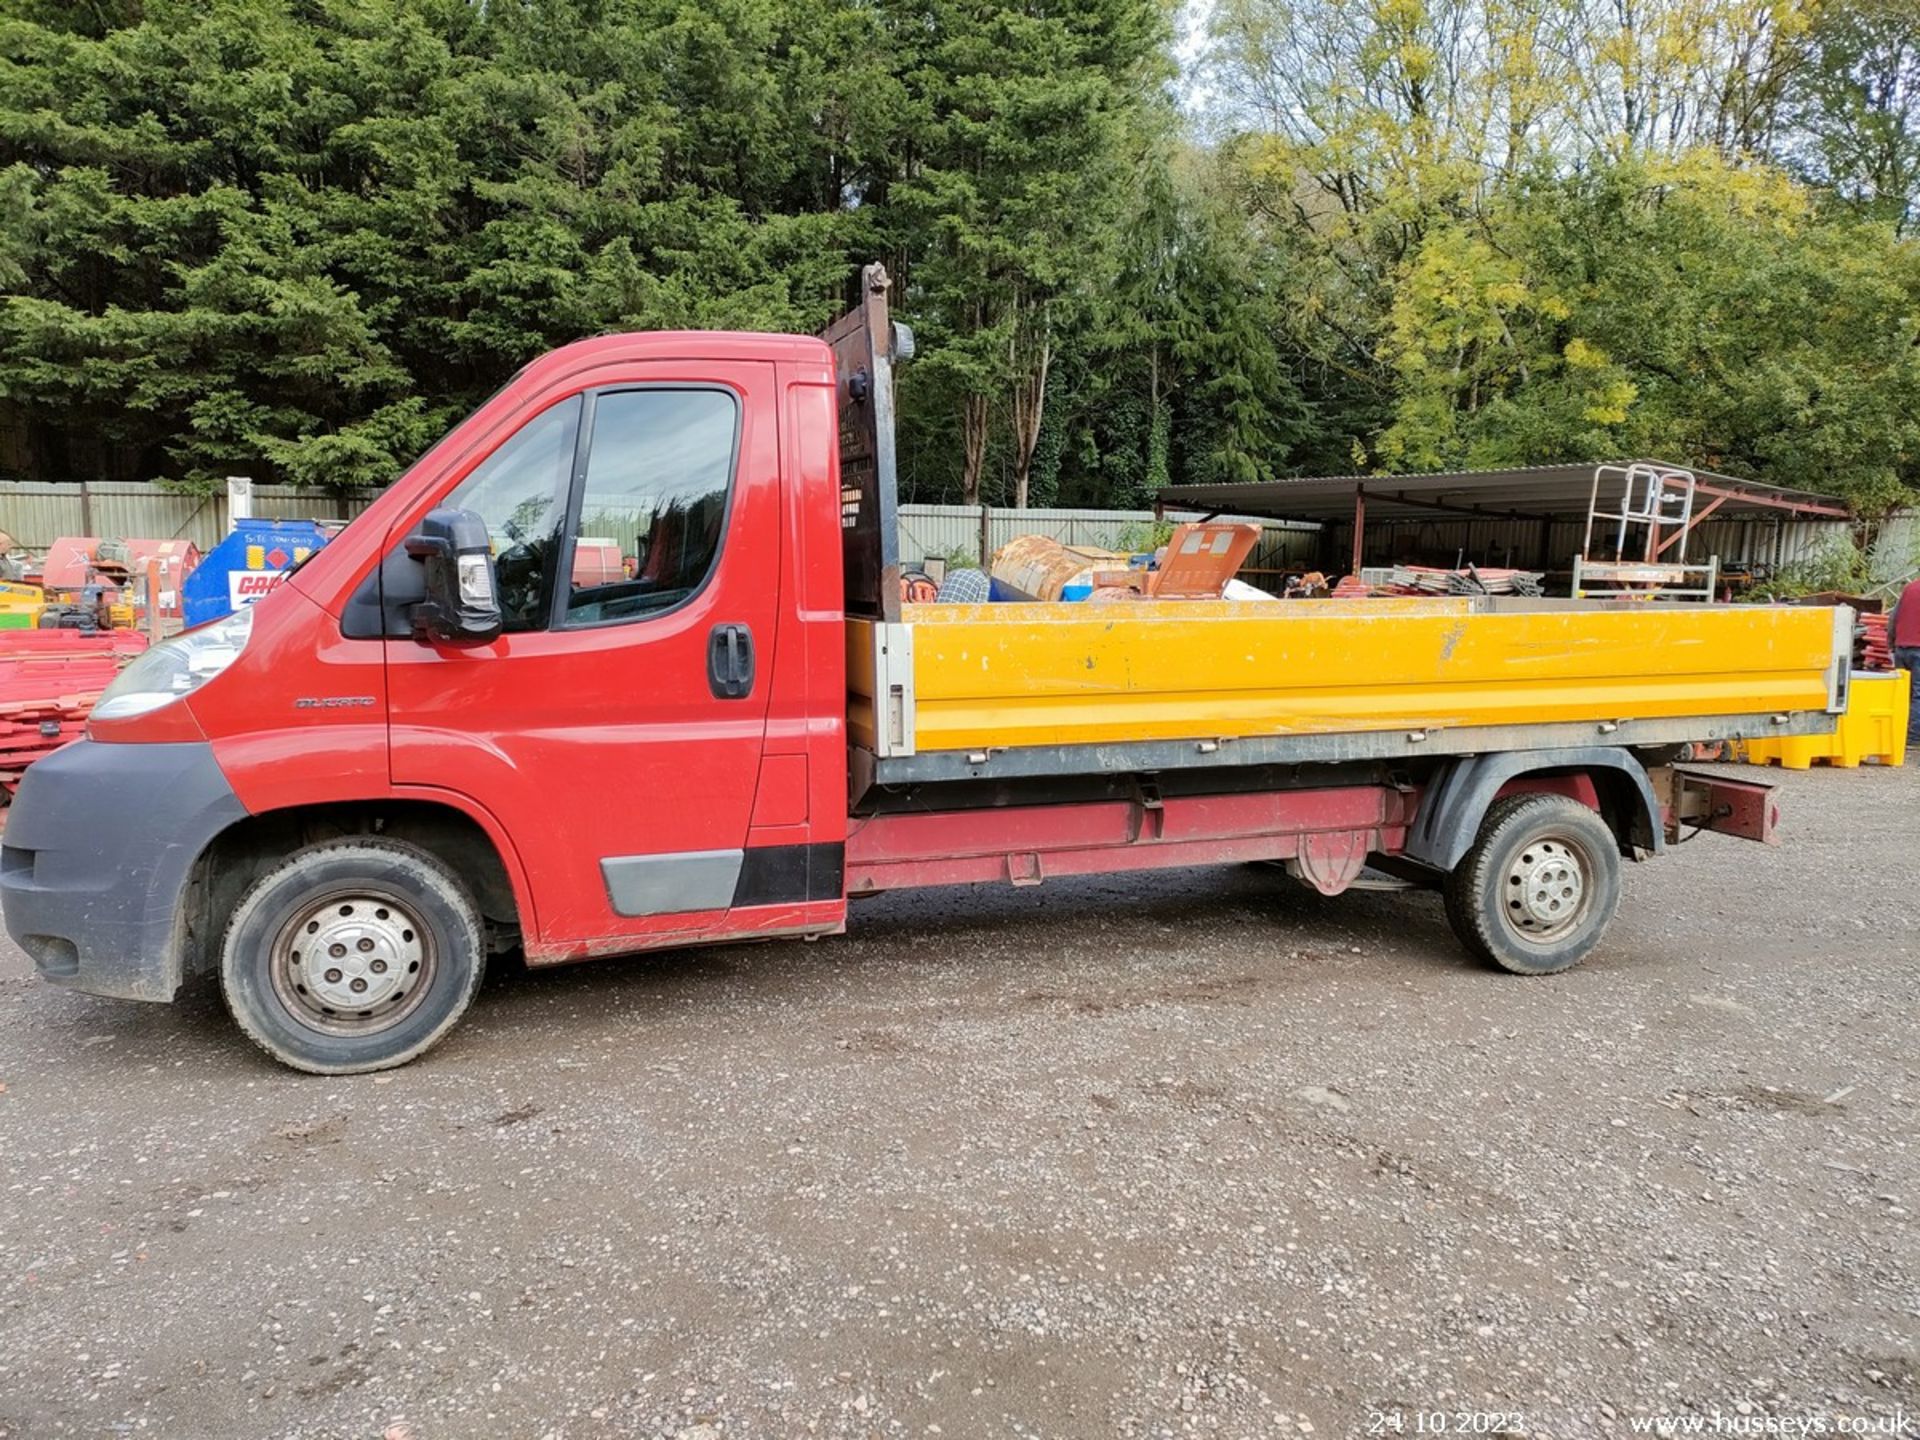 12/62 FIAT DUCATO 35 MULTIJET - 2287cc 2dr Flat Bed (Red, 134k) - Image 13 of 29